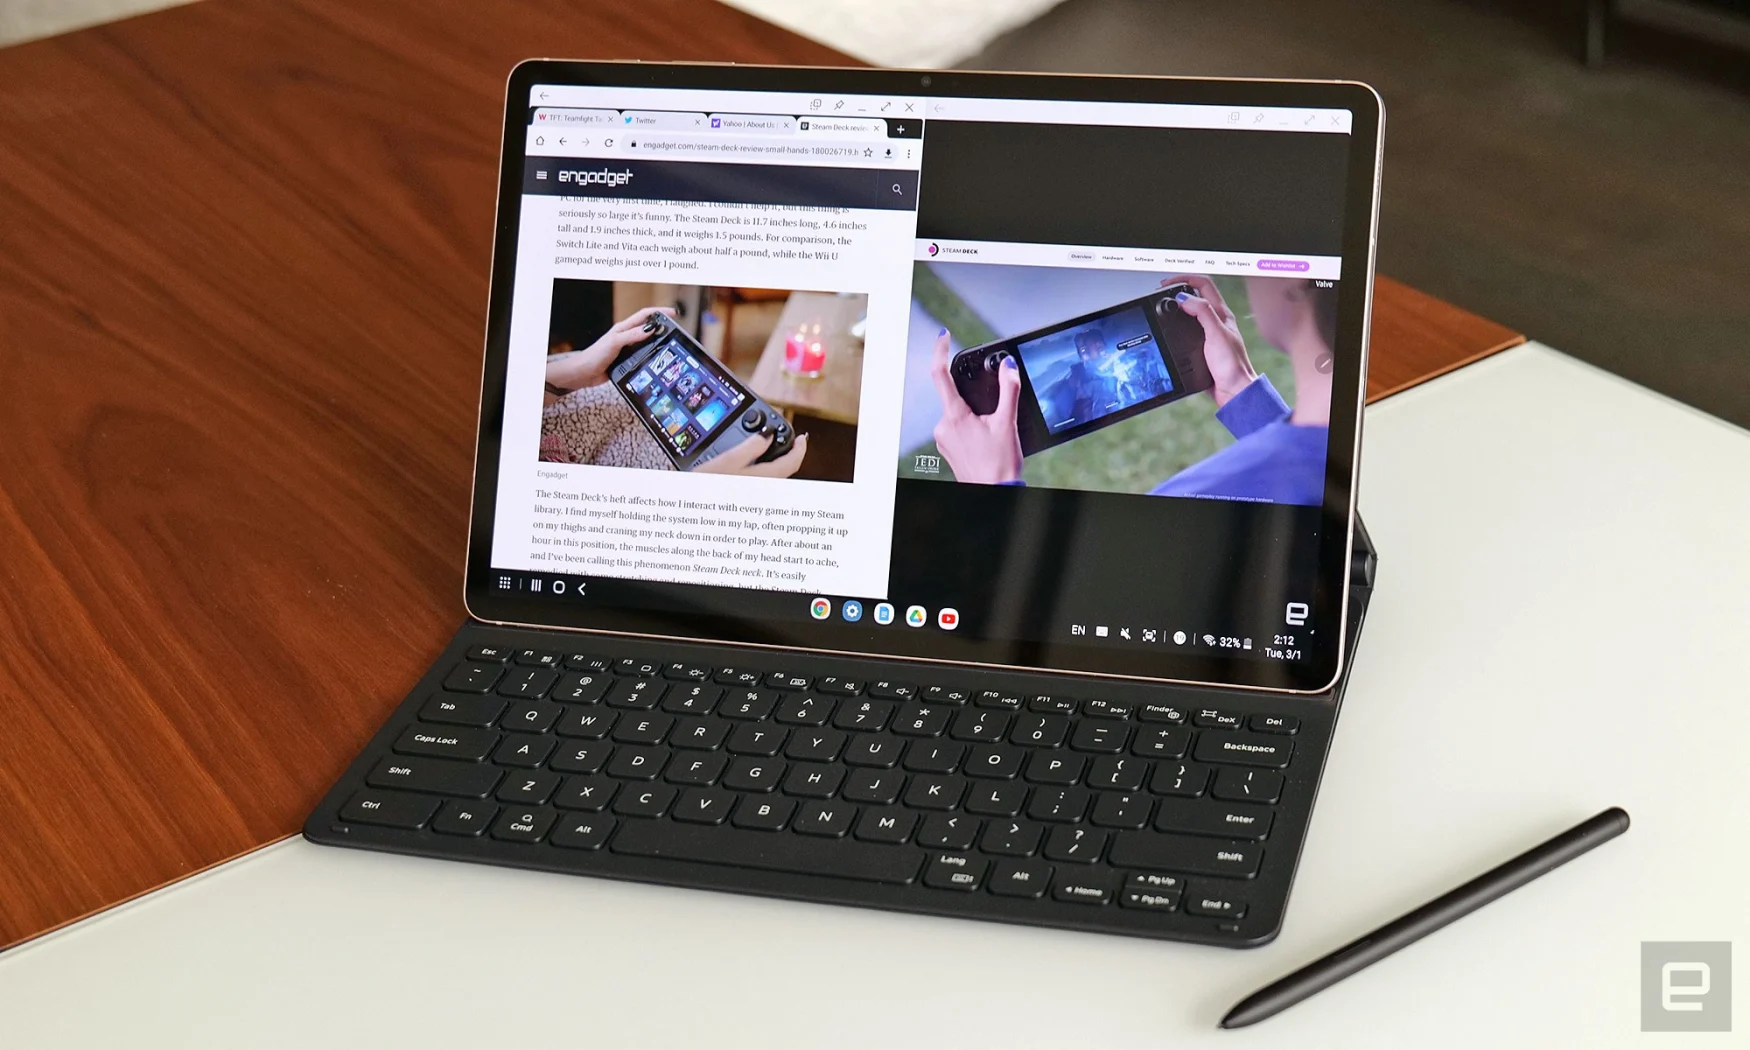 When you want to get work done, the Galaxy Tab S8+ uses Dex mode to provide a more desktop-like UI.